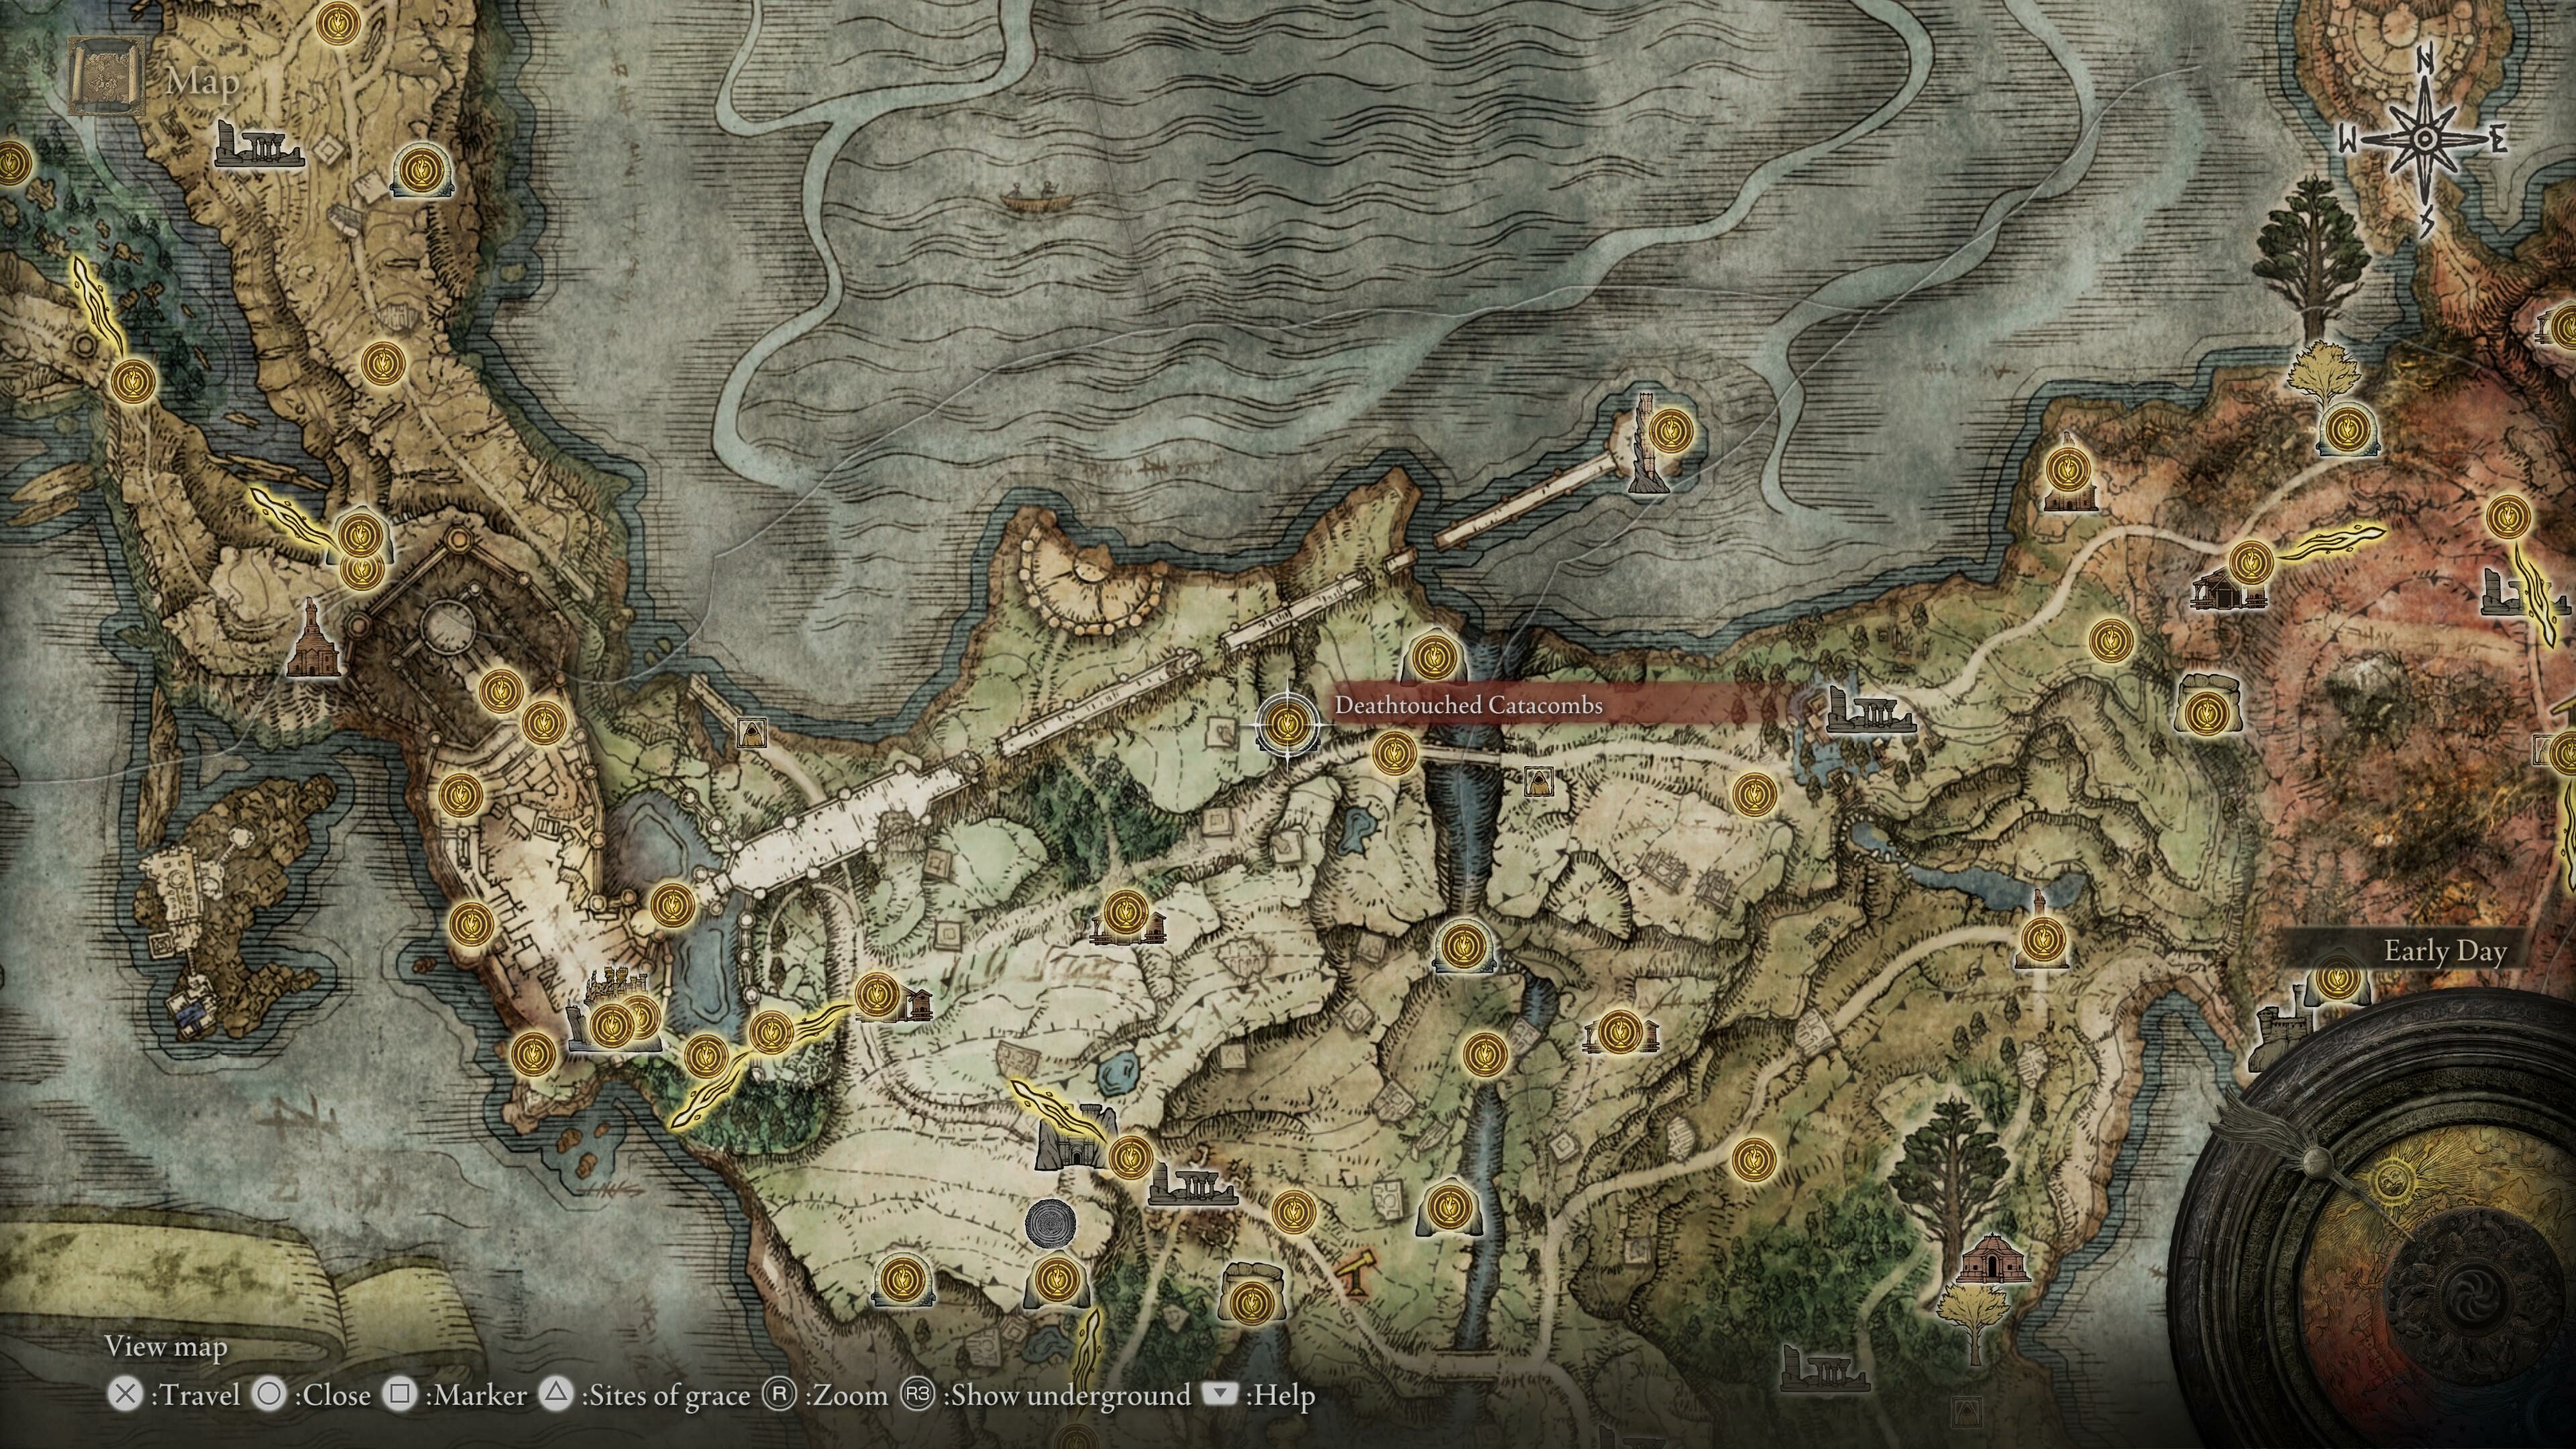 elden ring map - a detailed map of the world in elden ring, showing a location